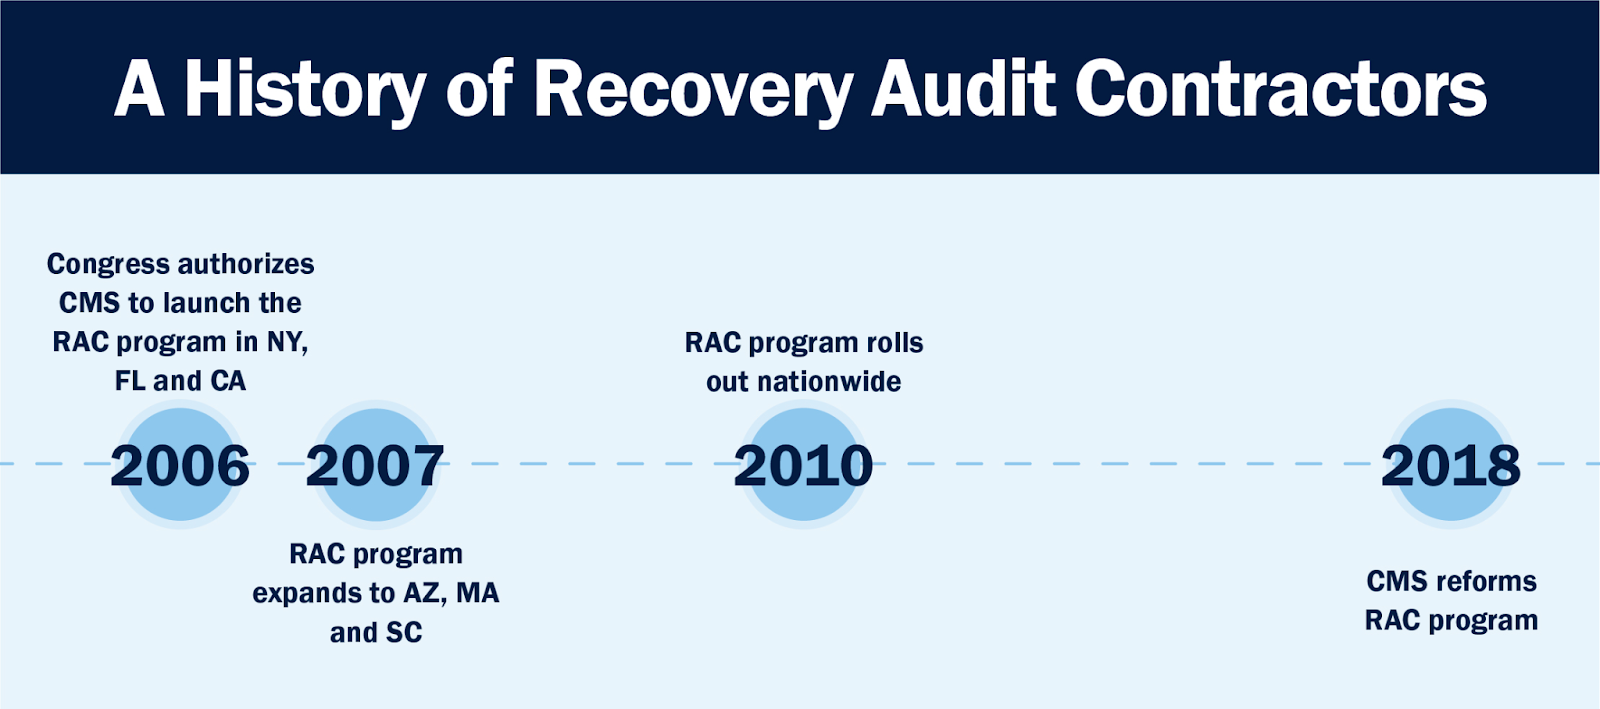 A history of recovery audit contractors